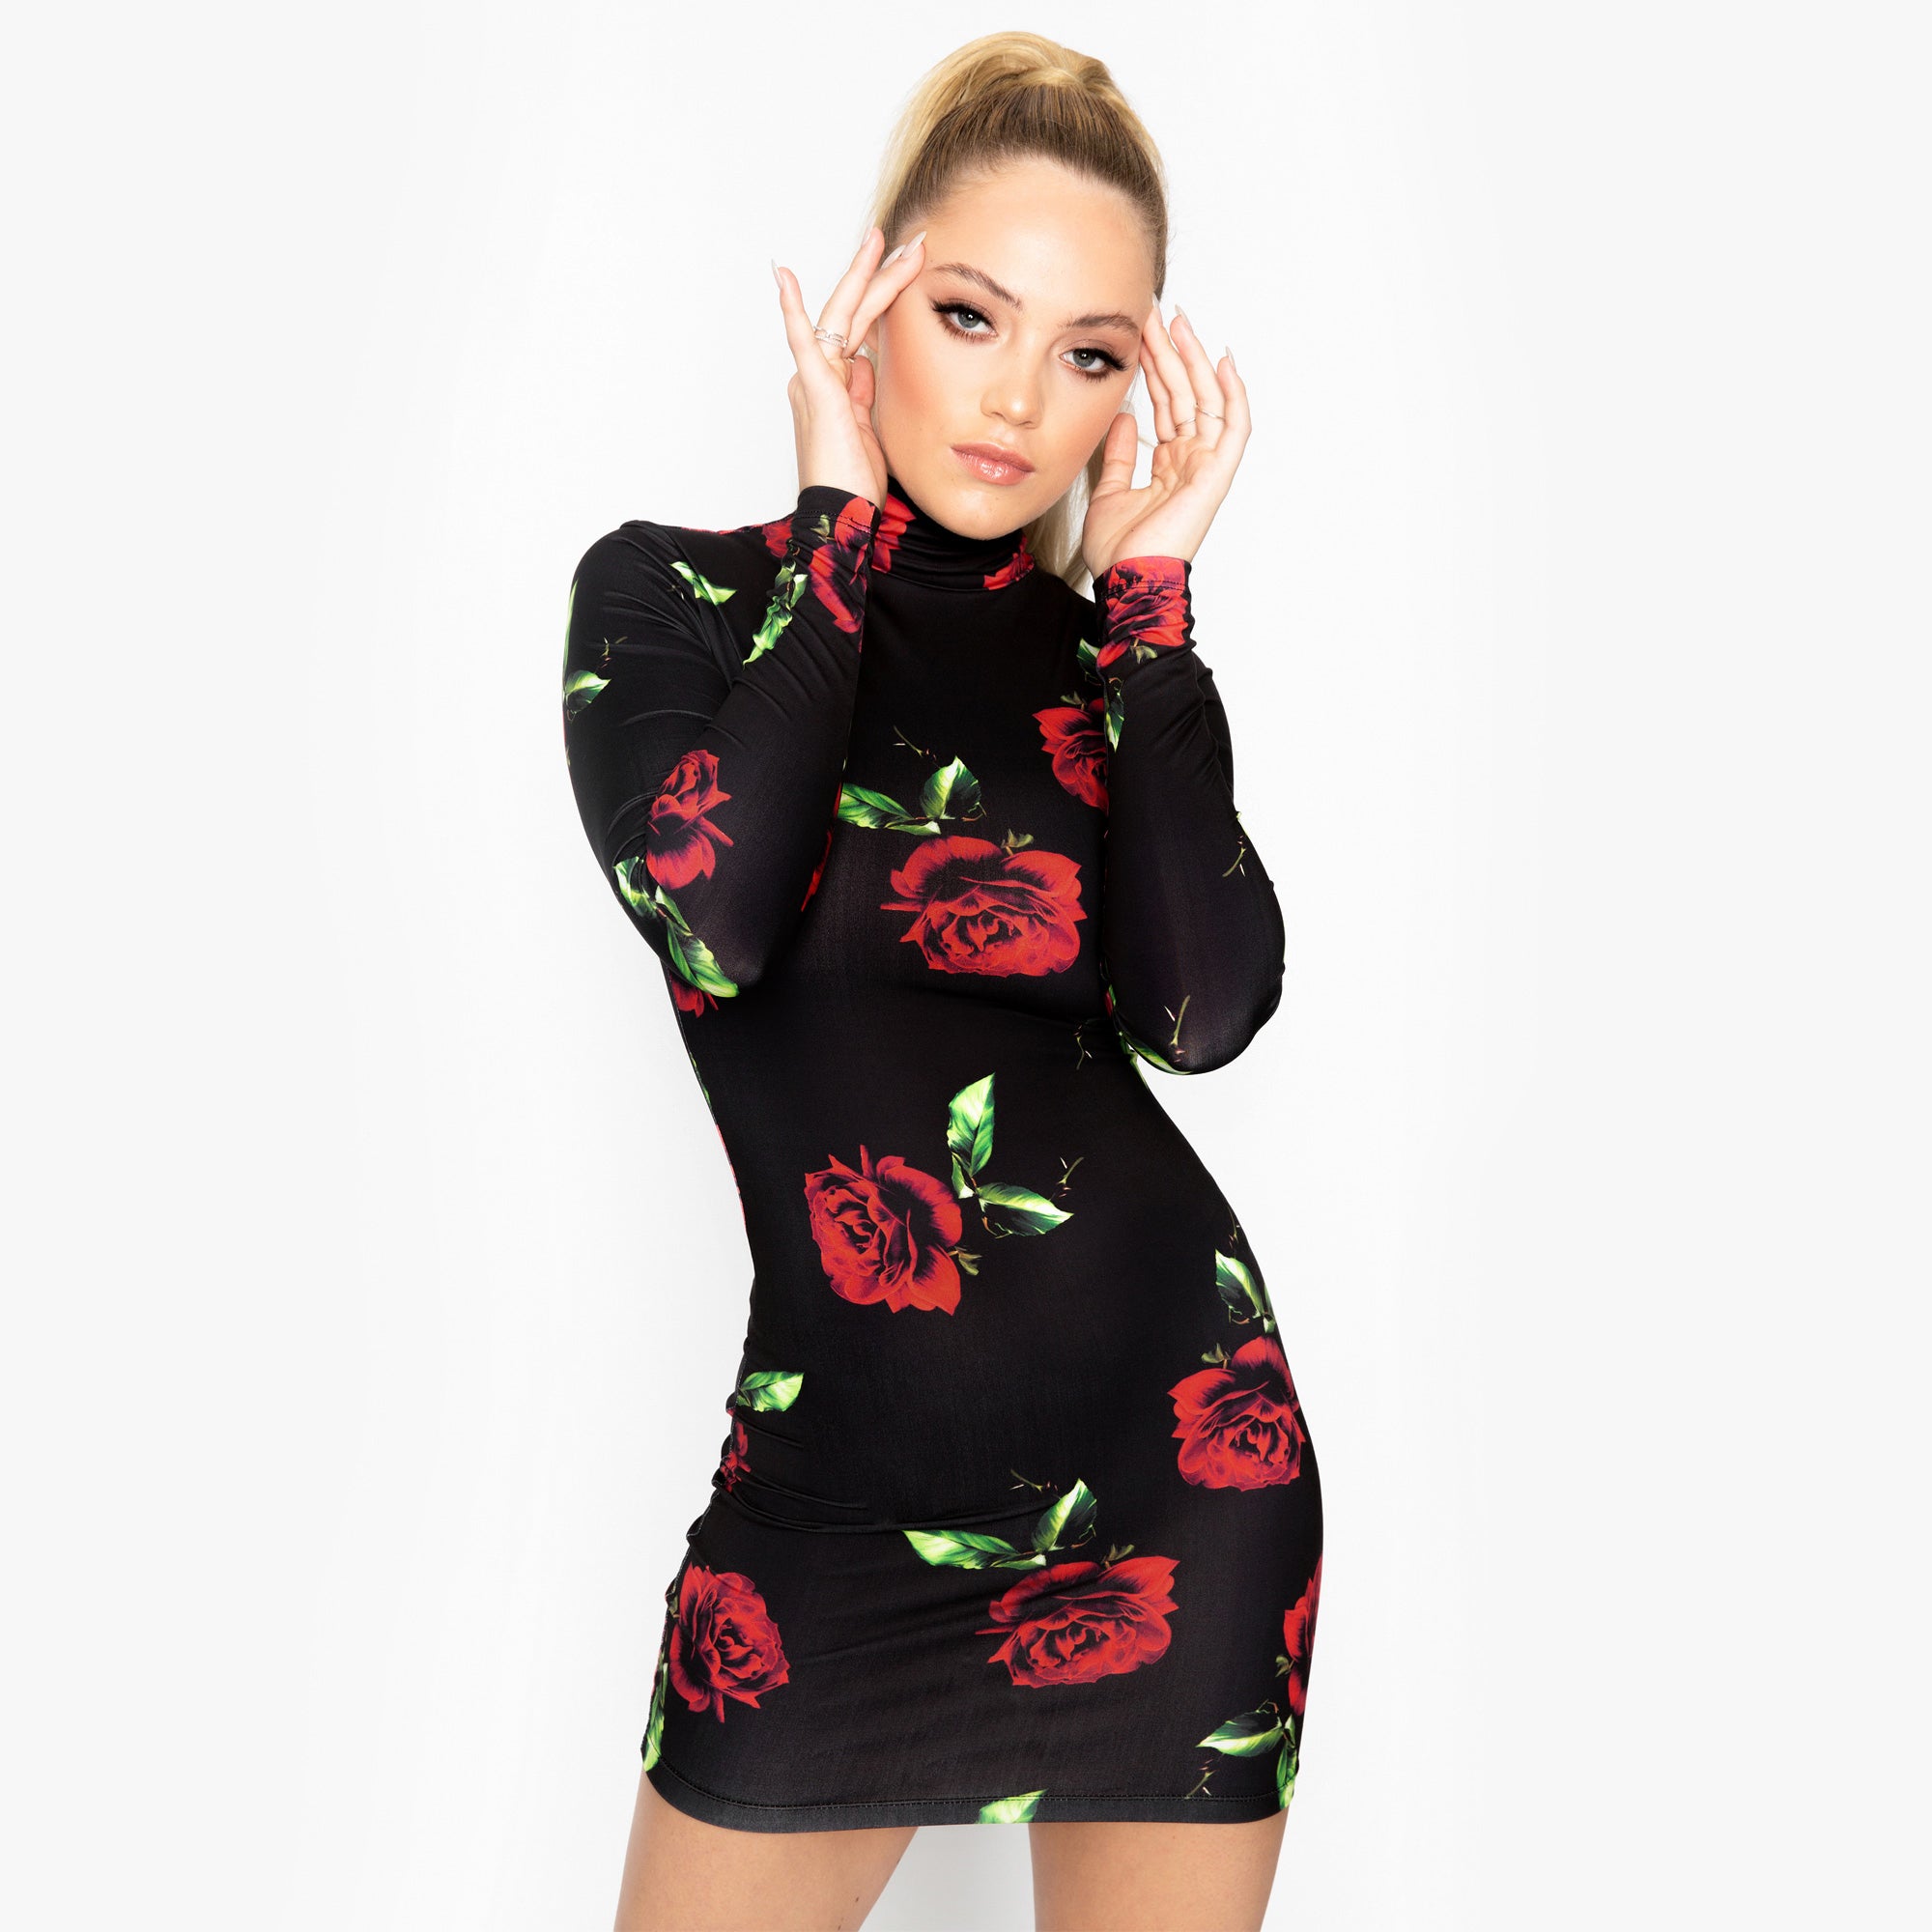 Official Dress Girl – Jersey Rose Red